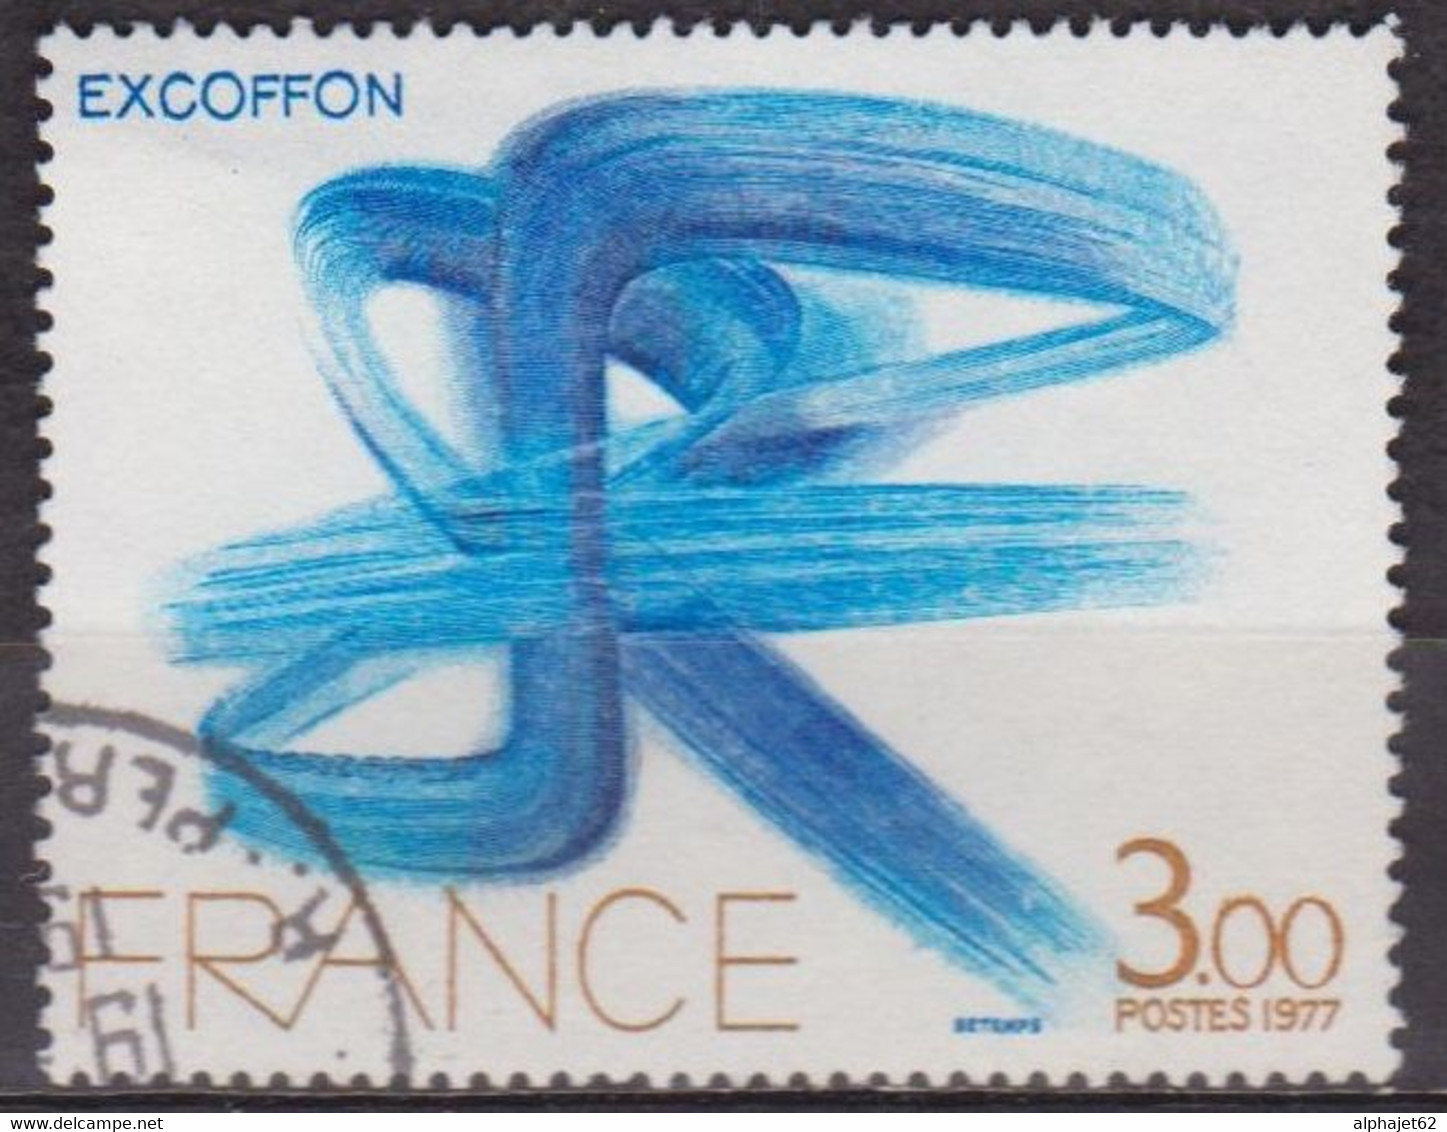 Oeuvre Originale D'Excoffon - FRANCE - Art, Peinture - N° 1951 - 1977 - Used Stamps